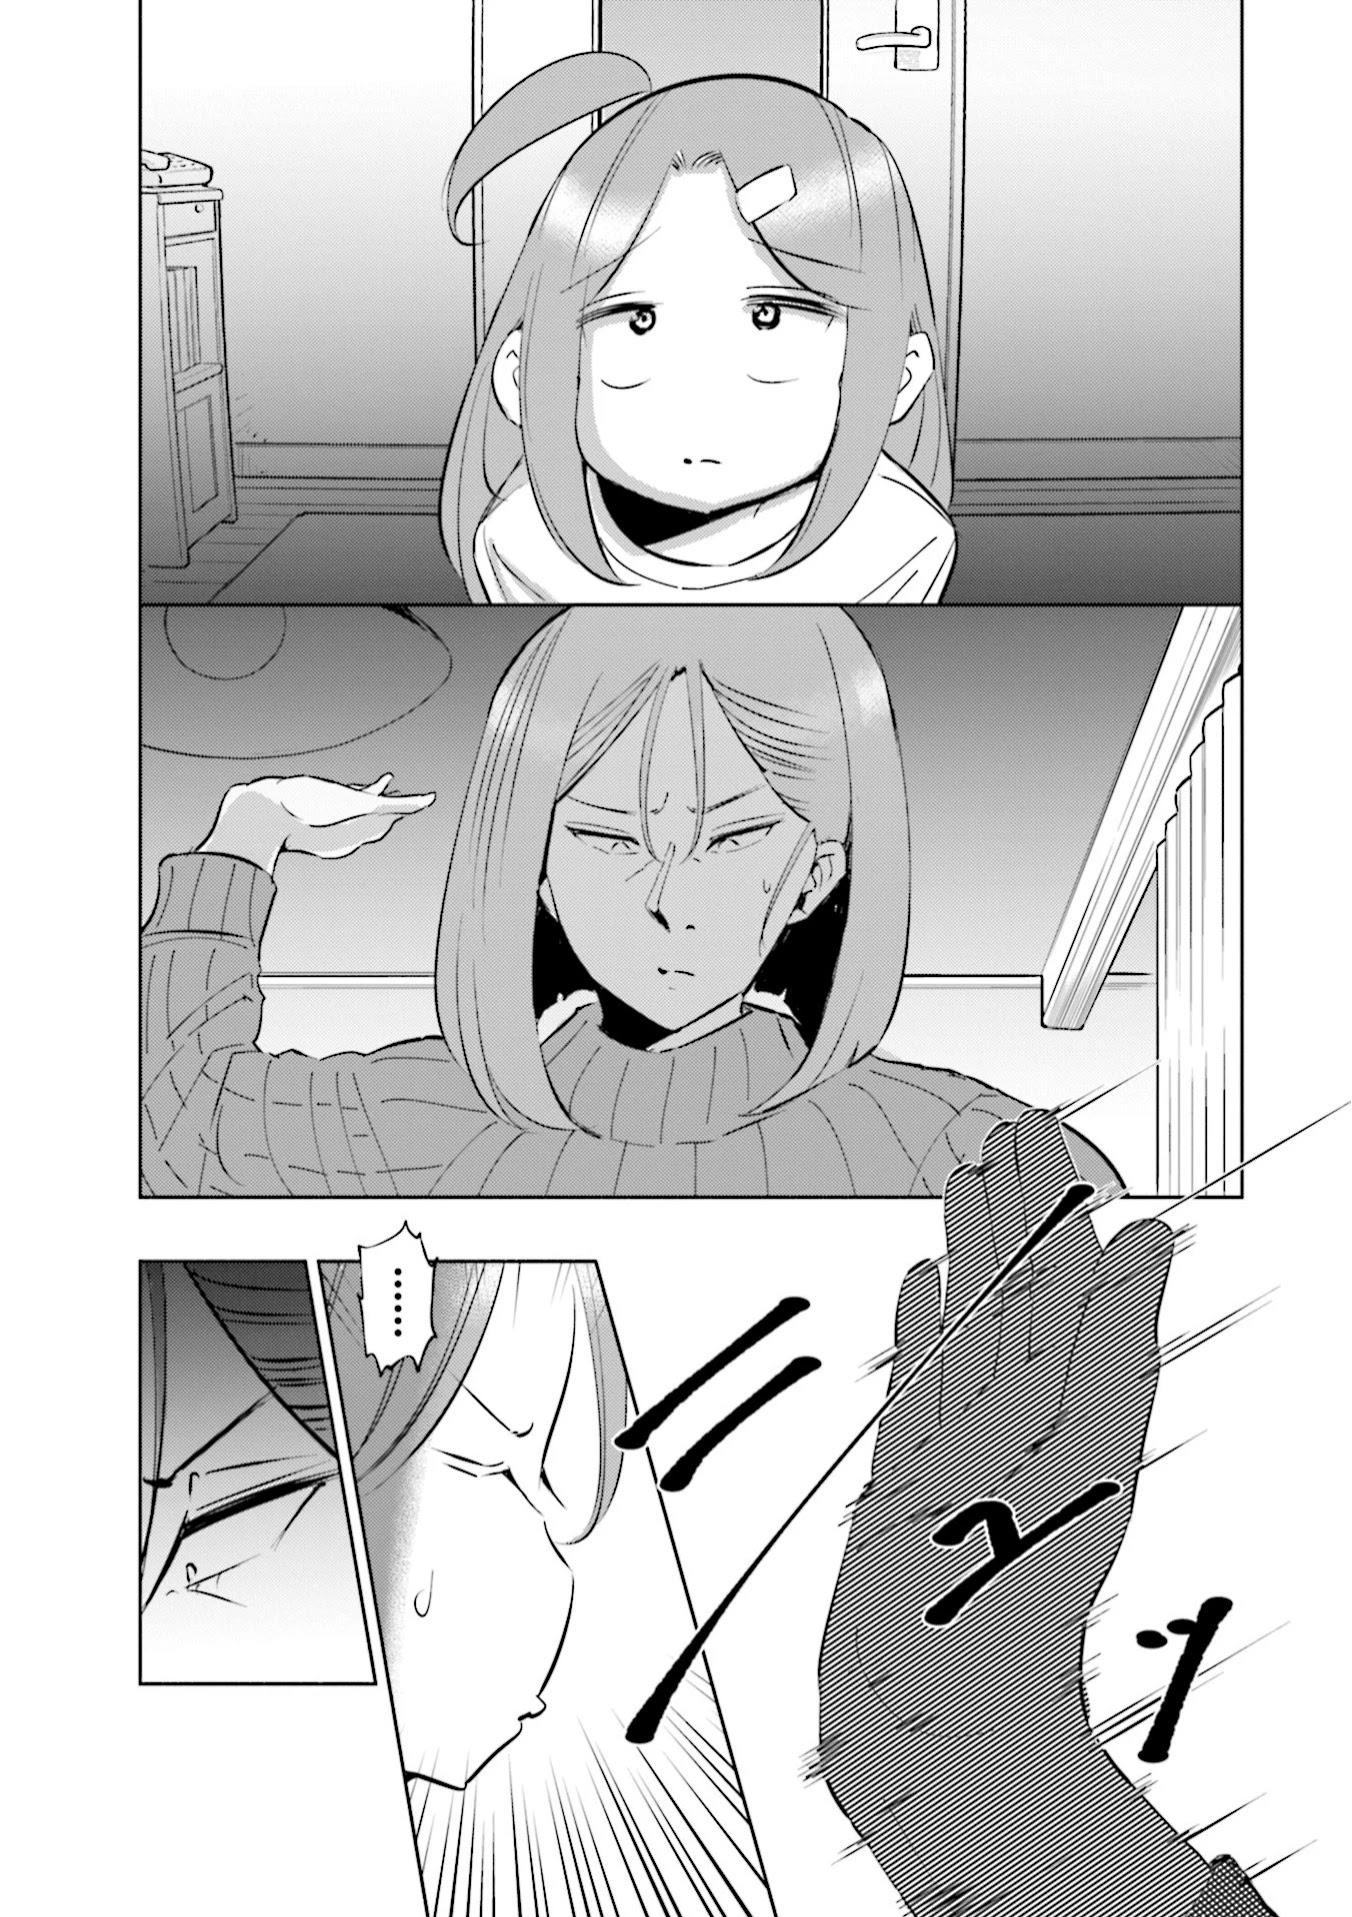 If My Wife Became An Elementary School Student Chapter 41 page 20 - Mangakakalots.com